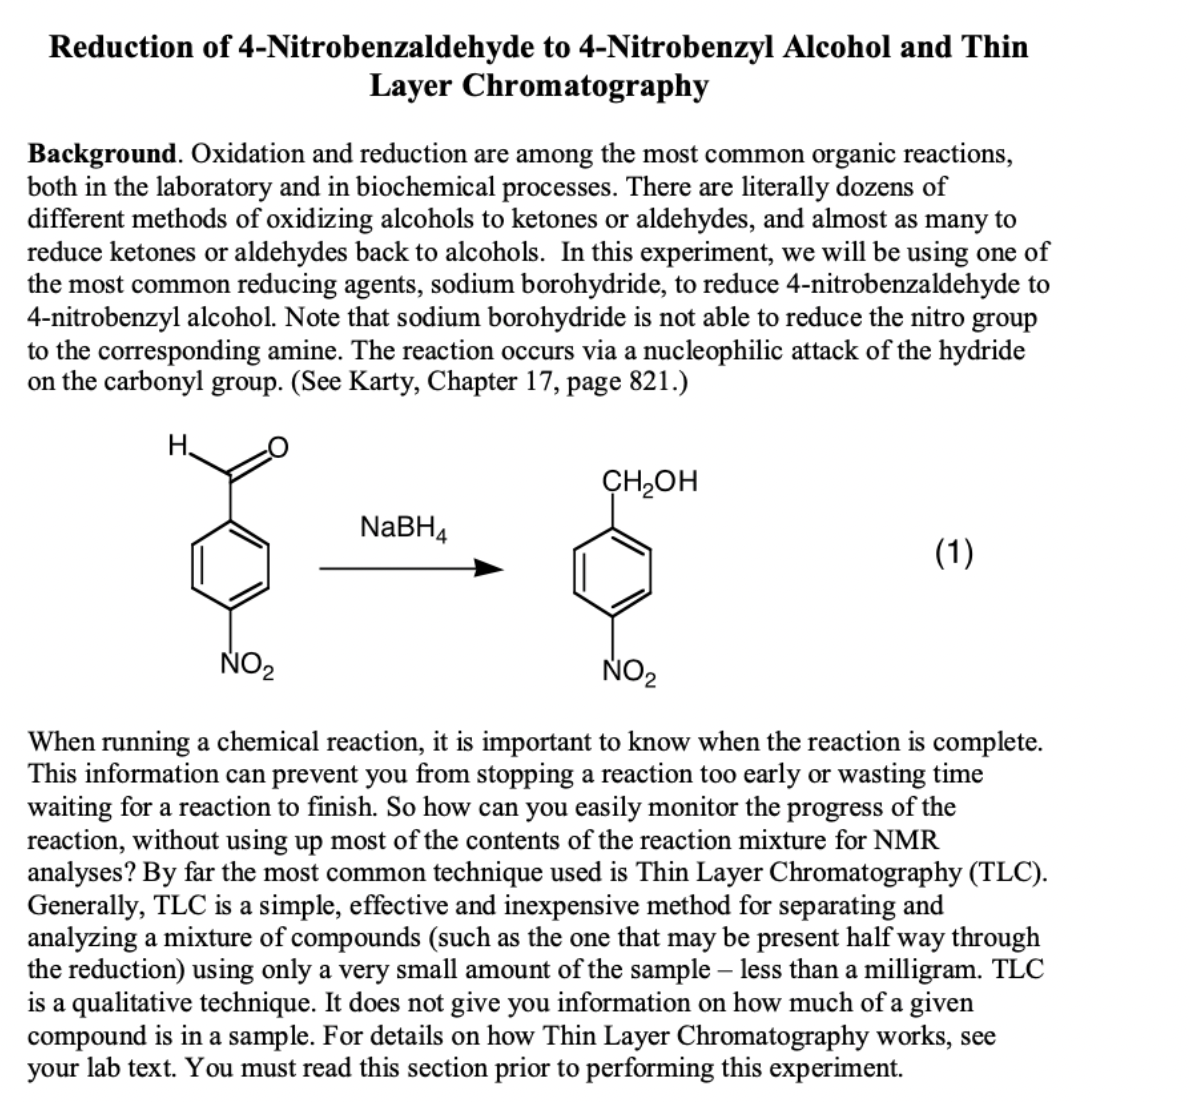 Reduction of 4-Nitrobenzaldehyde to 4-Nitrobenzyl Alcohol and Thin
Layer Chromatography
Background. Oxidation and reduction are among the most common organic reactions,
both in the laboratory and in biochemical processes. There are literally dozens of
different methods of oxidizing alcohols to ketones or aldehydes, and almost as many to
reduce ketones or aldehydes back to alcohols. In this experiment, we will be using one of
the most common reducing agents, sodium borohydride, to reduce 4-nitrobenzaldehyde to
4-nitrobenzyl alcohol. Note that sodium borohydride is not able to reduce the nitro group
to the corresponding amine. The reaction occurs via a nucleophilic attack of the hydride
on the carbonyl group. (See Karty, Chapter 17, page 821.)
H.
CH2OH
NaBH4
(1)
NO2
When running a chemical reaction, it is important to know when the reaction is complete.
This information can prevent you from stopping a reaction too early or wasting time
waiting for a reaction to finish. So how can you easily monitor the progress of the
reaction, without using up most of the contents of the reaction mixture for NMR
analyses? By far the most common technique used is Thin Layer Chromatography (TLC).
Generally, TLC is a simple, effective and inexpensive method for separating and
analyzing a mixture of compounds (such as the one that may be present half way through
the reduction) using only a very small amount of the sample – less than a milligram. TLC
is a qualitative technique. It does not give you information on how much of a given
compound is in a sample. For details on how Thin Layer Chromatography works, see
your lab text. You must read this section prior to performing this experiment.
